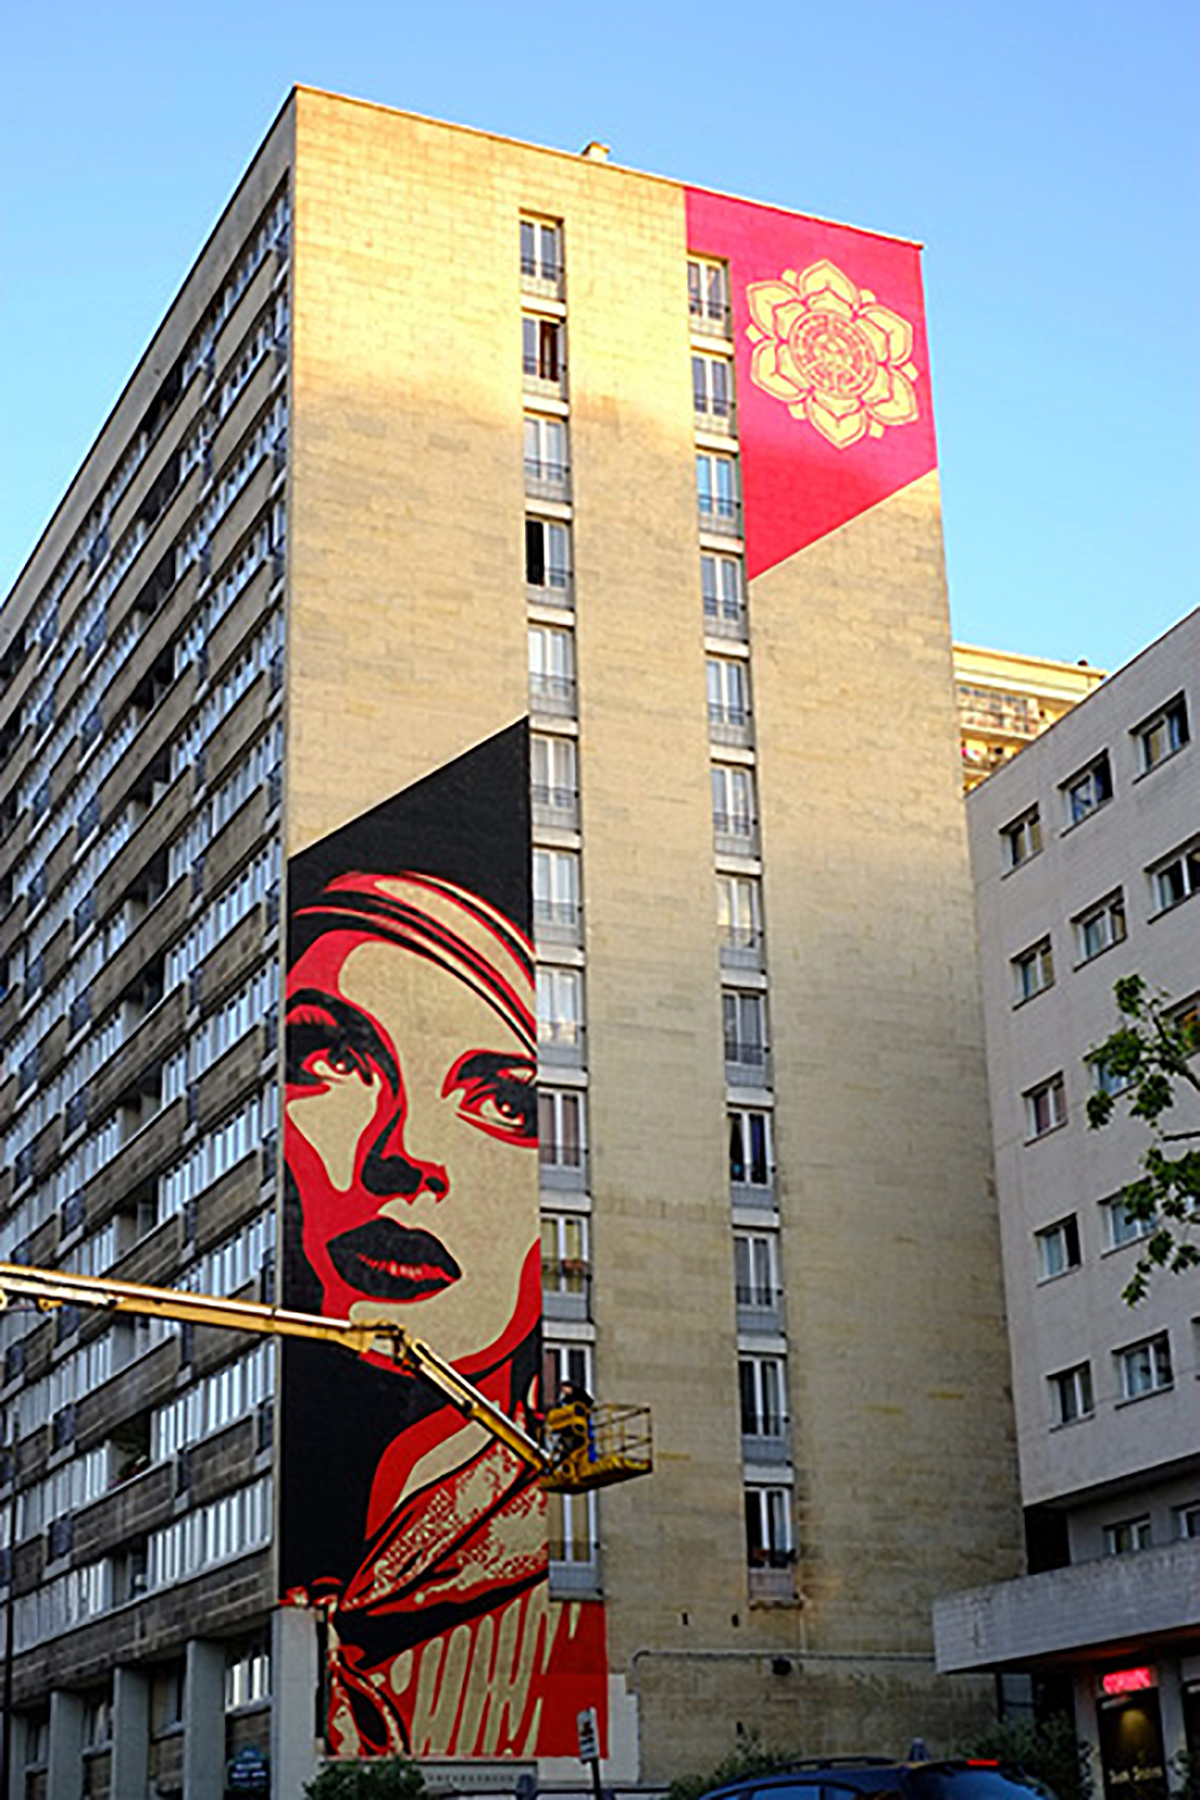 Obey-Itinerrance-6